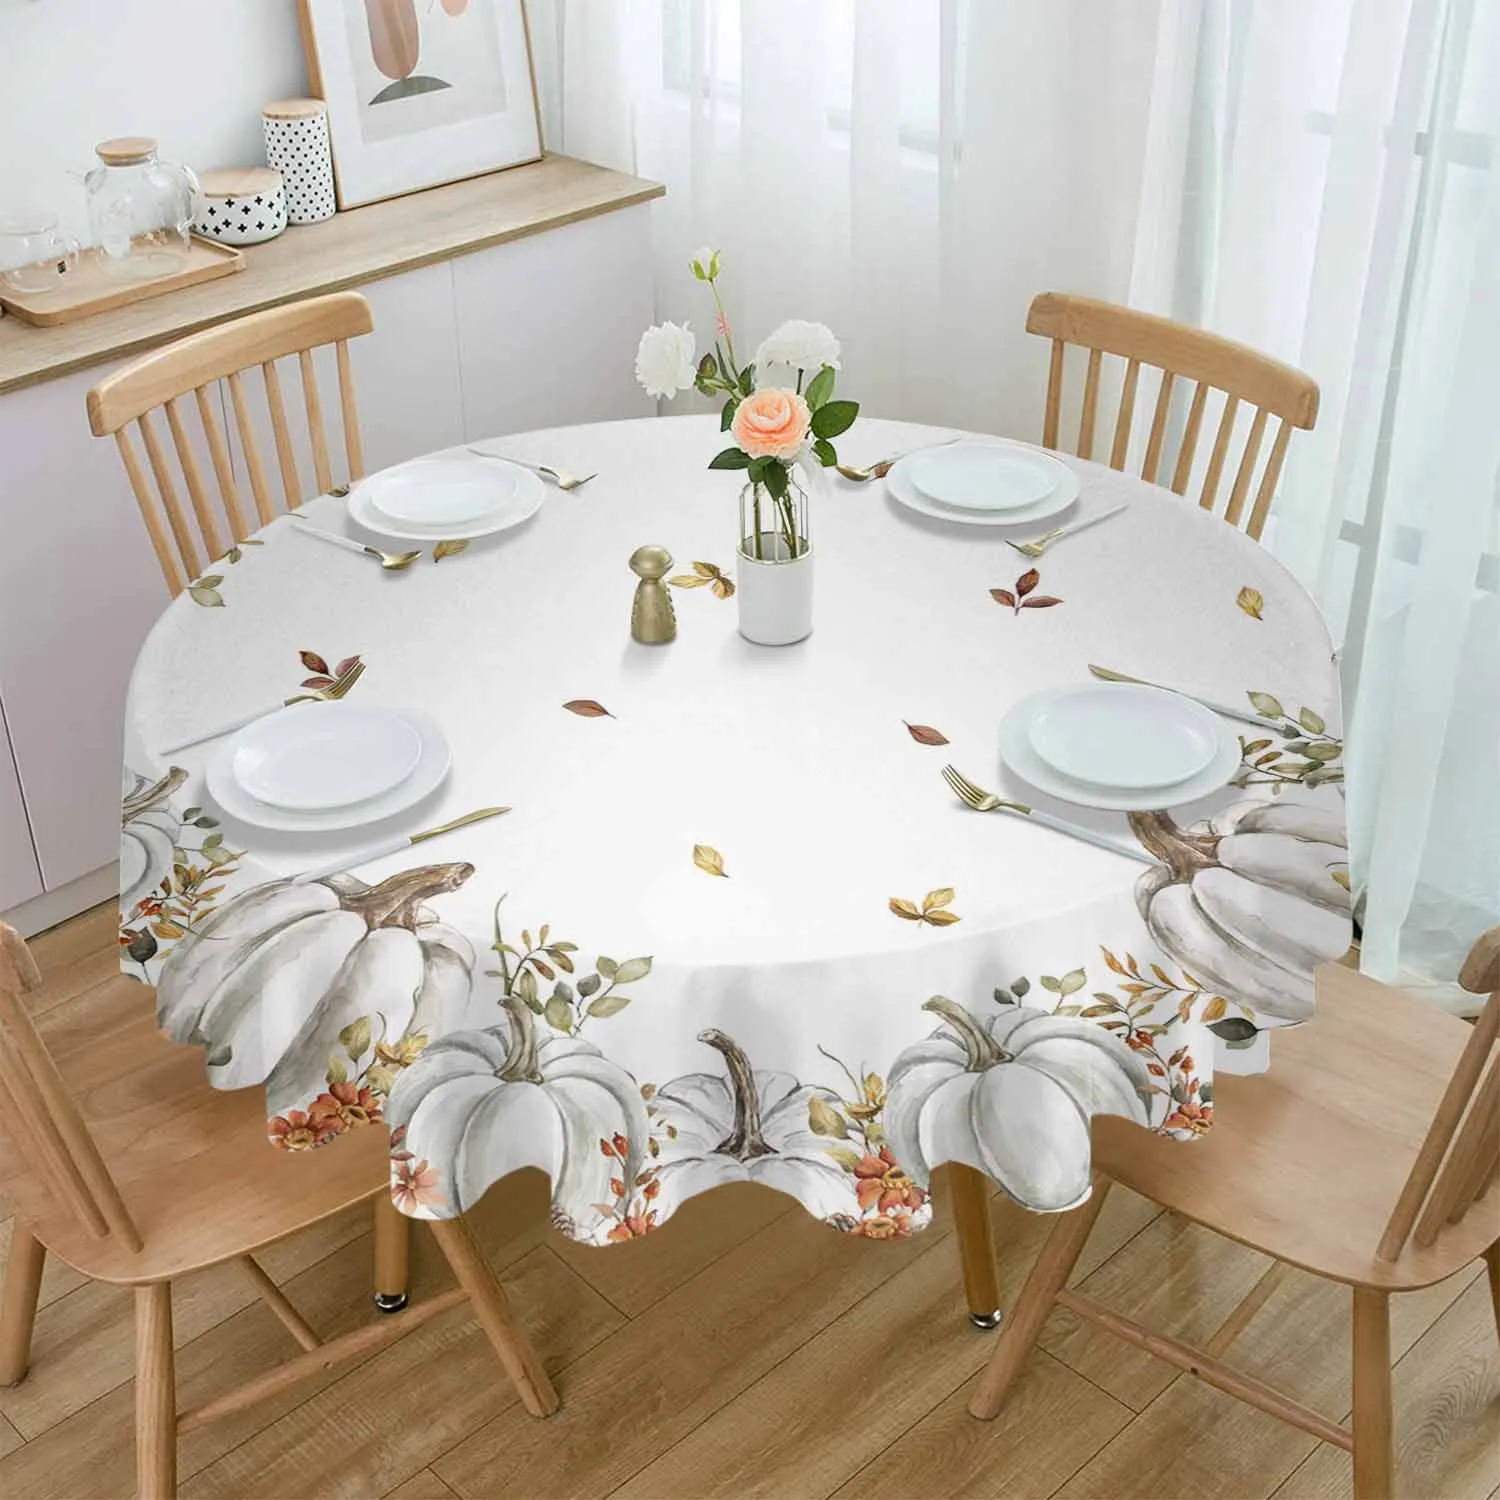 

Thanksgiving Pumpkin Round Tablecloth Waterproof Wedding Party Table Cover Holiday Dining Table Tablecloth